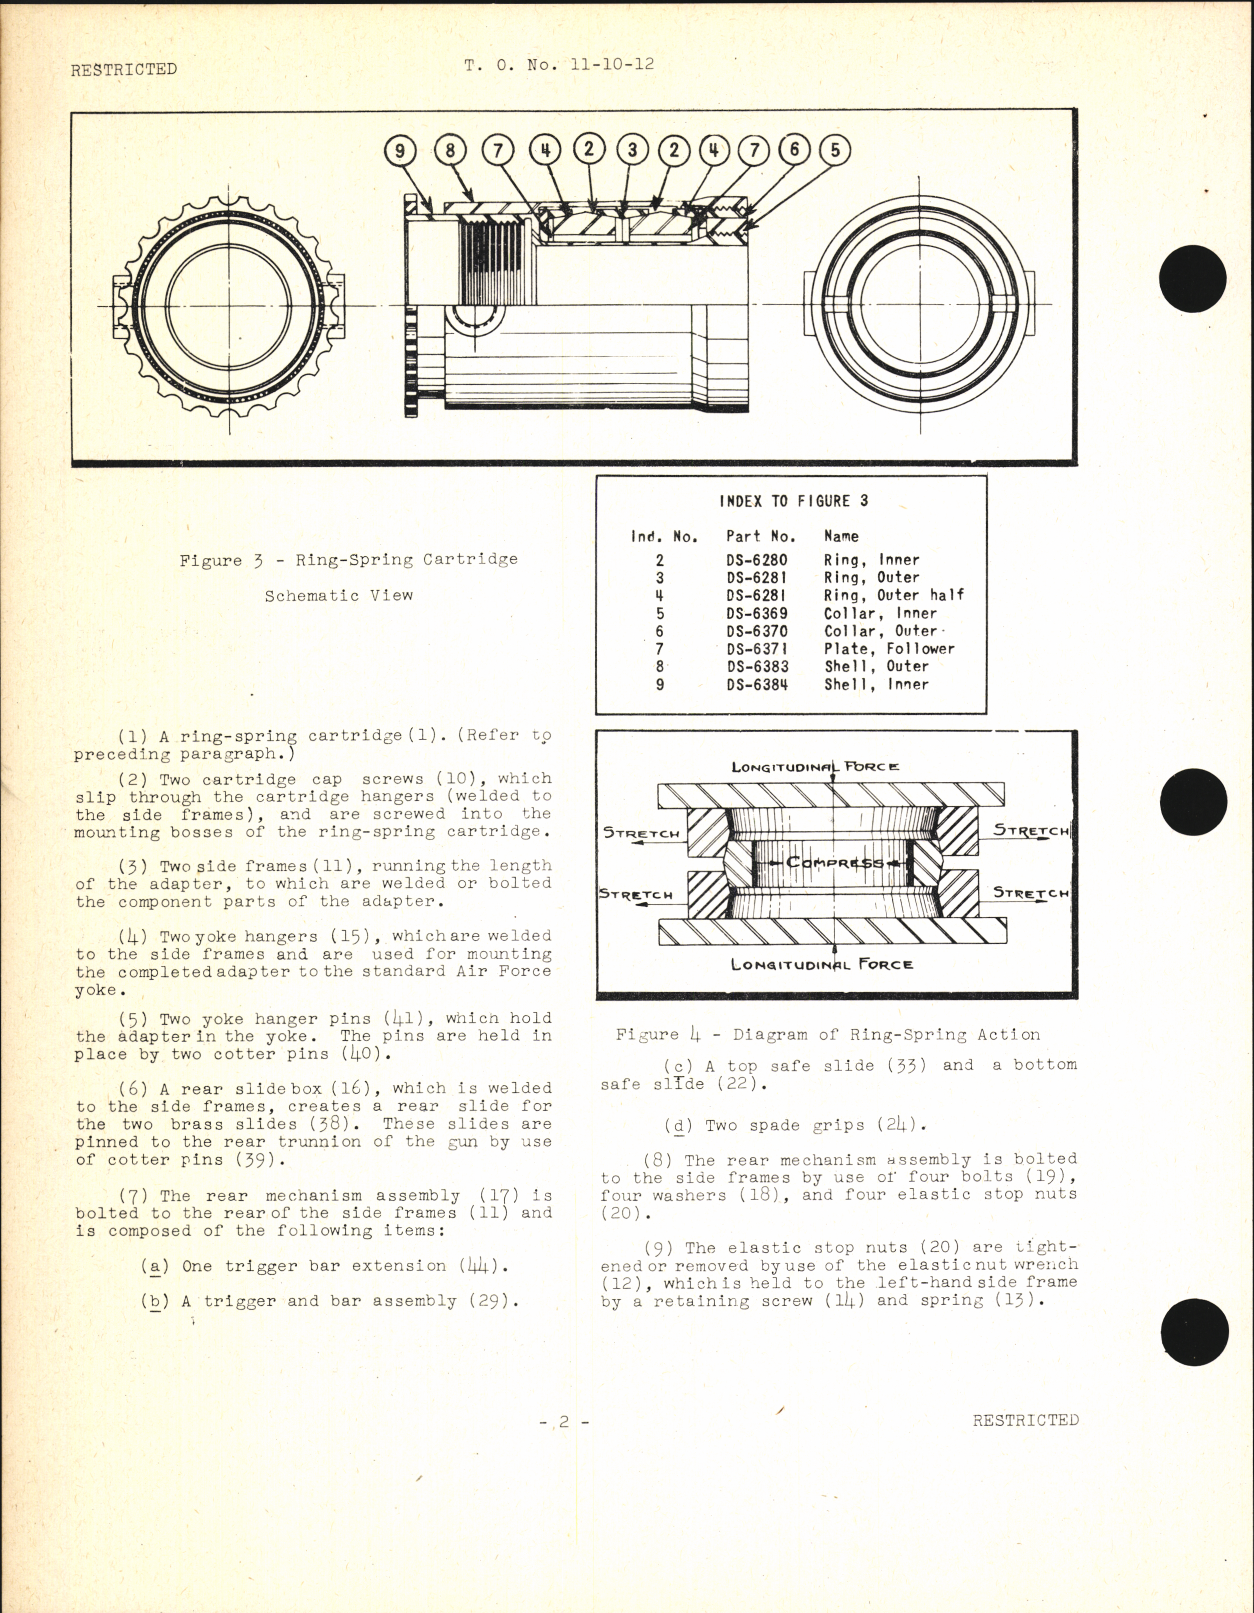 Sample page 8 from AirCorps Library document: Handbook of Instructions with Parts Catalog for Type E-12 Gun Mount Adapter